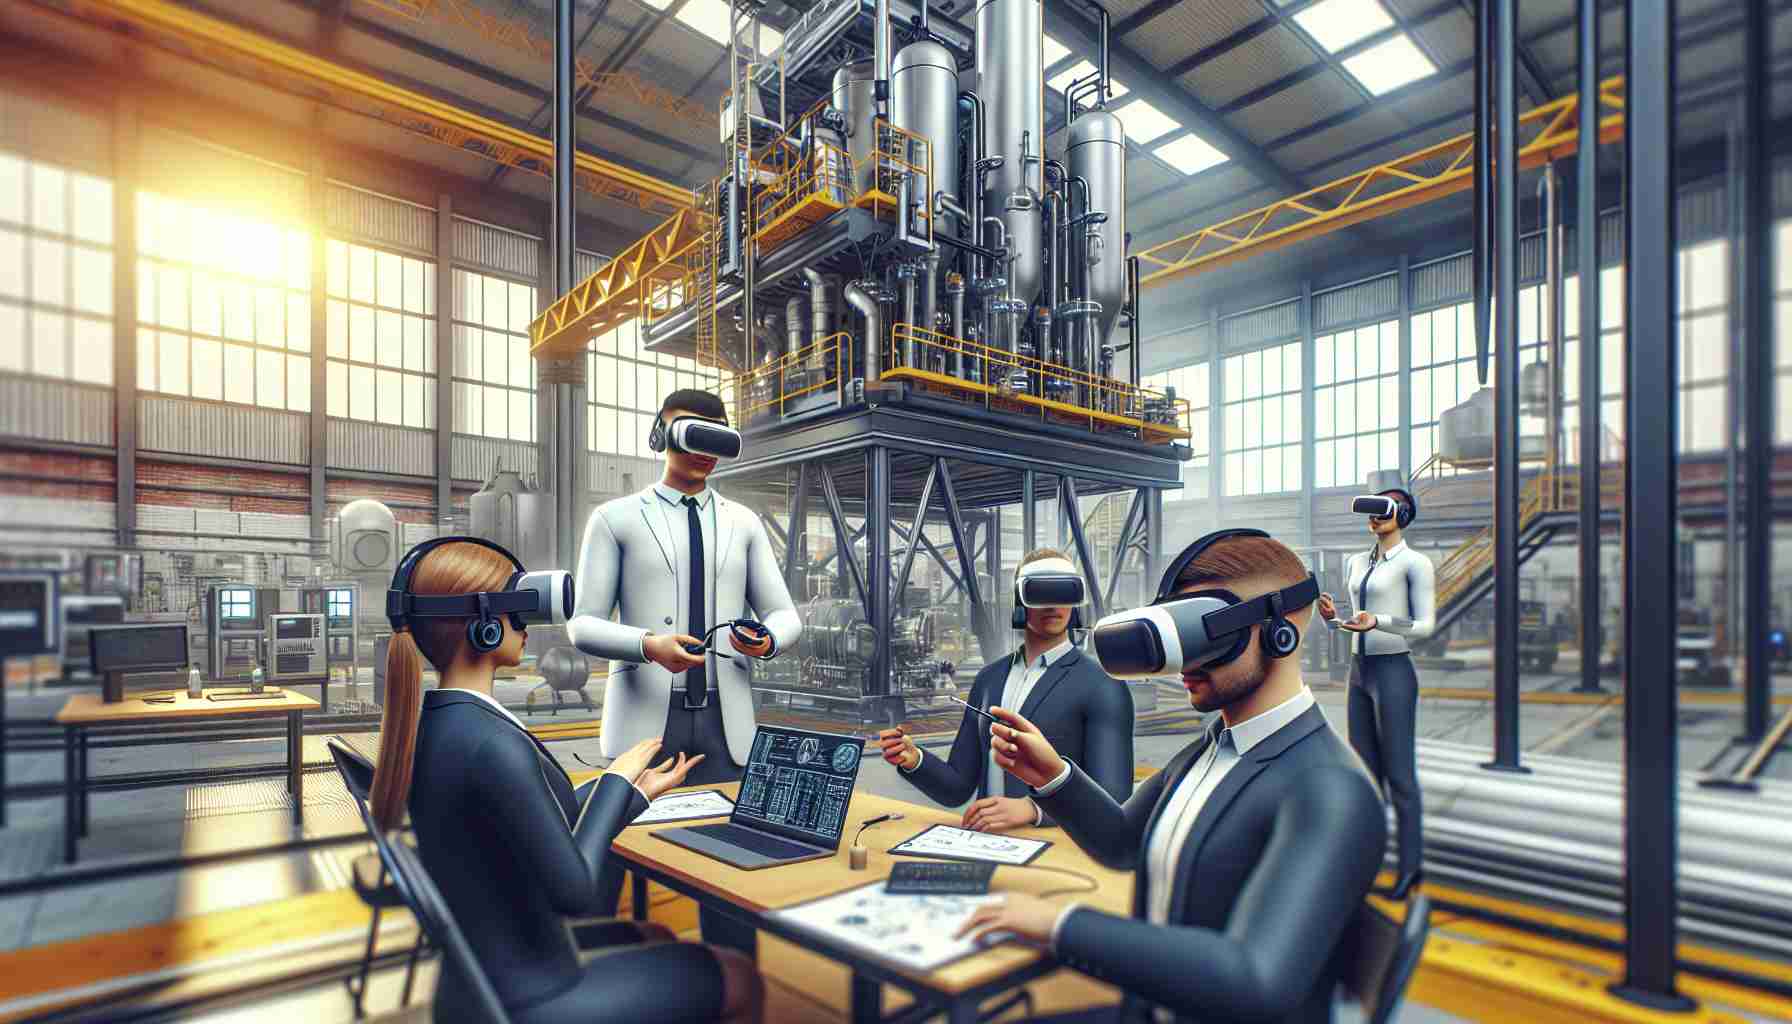 Oberon Technologies® Revolutionizes Energy Sector Training with Virtual Reality